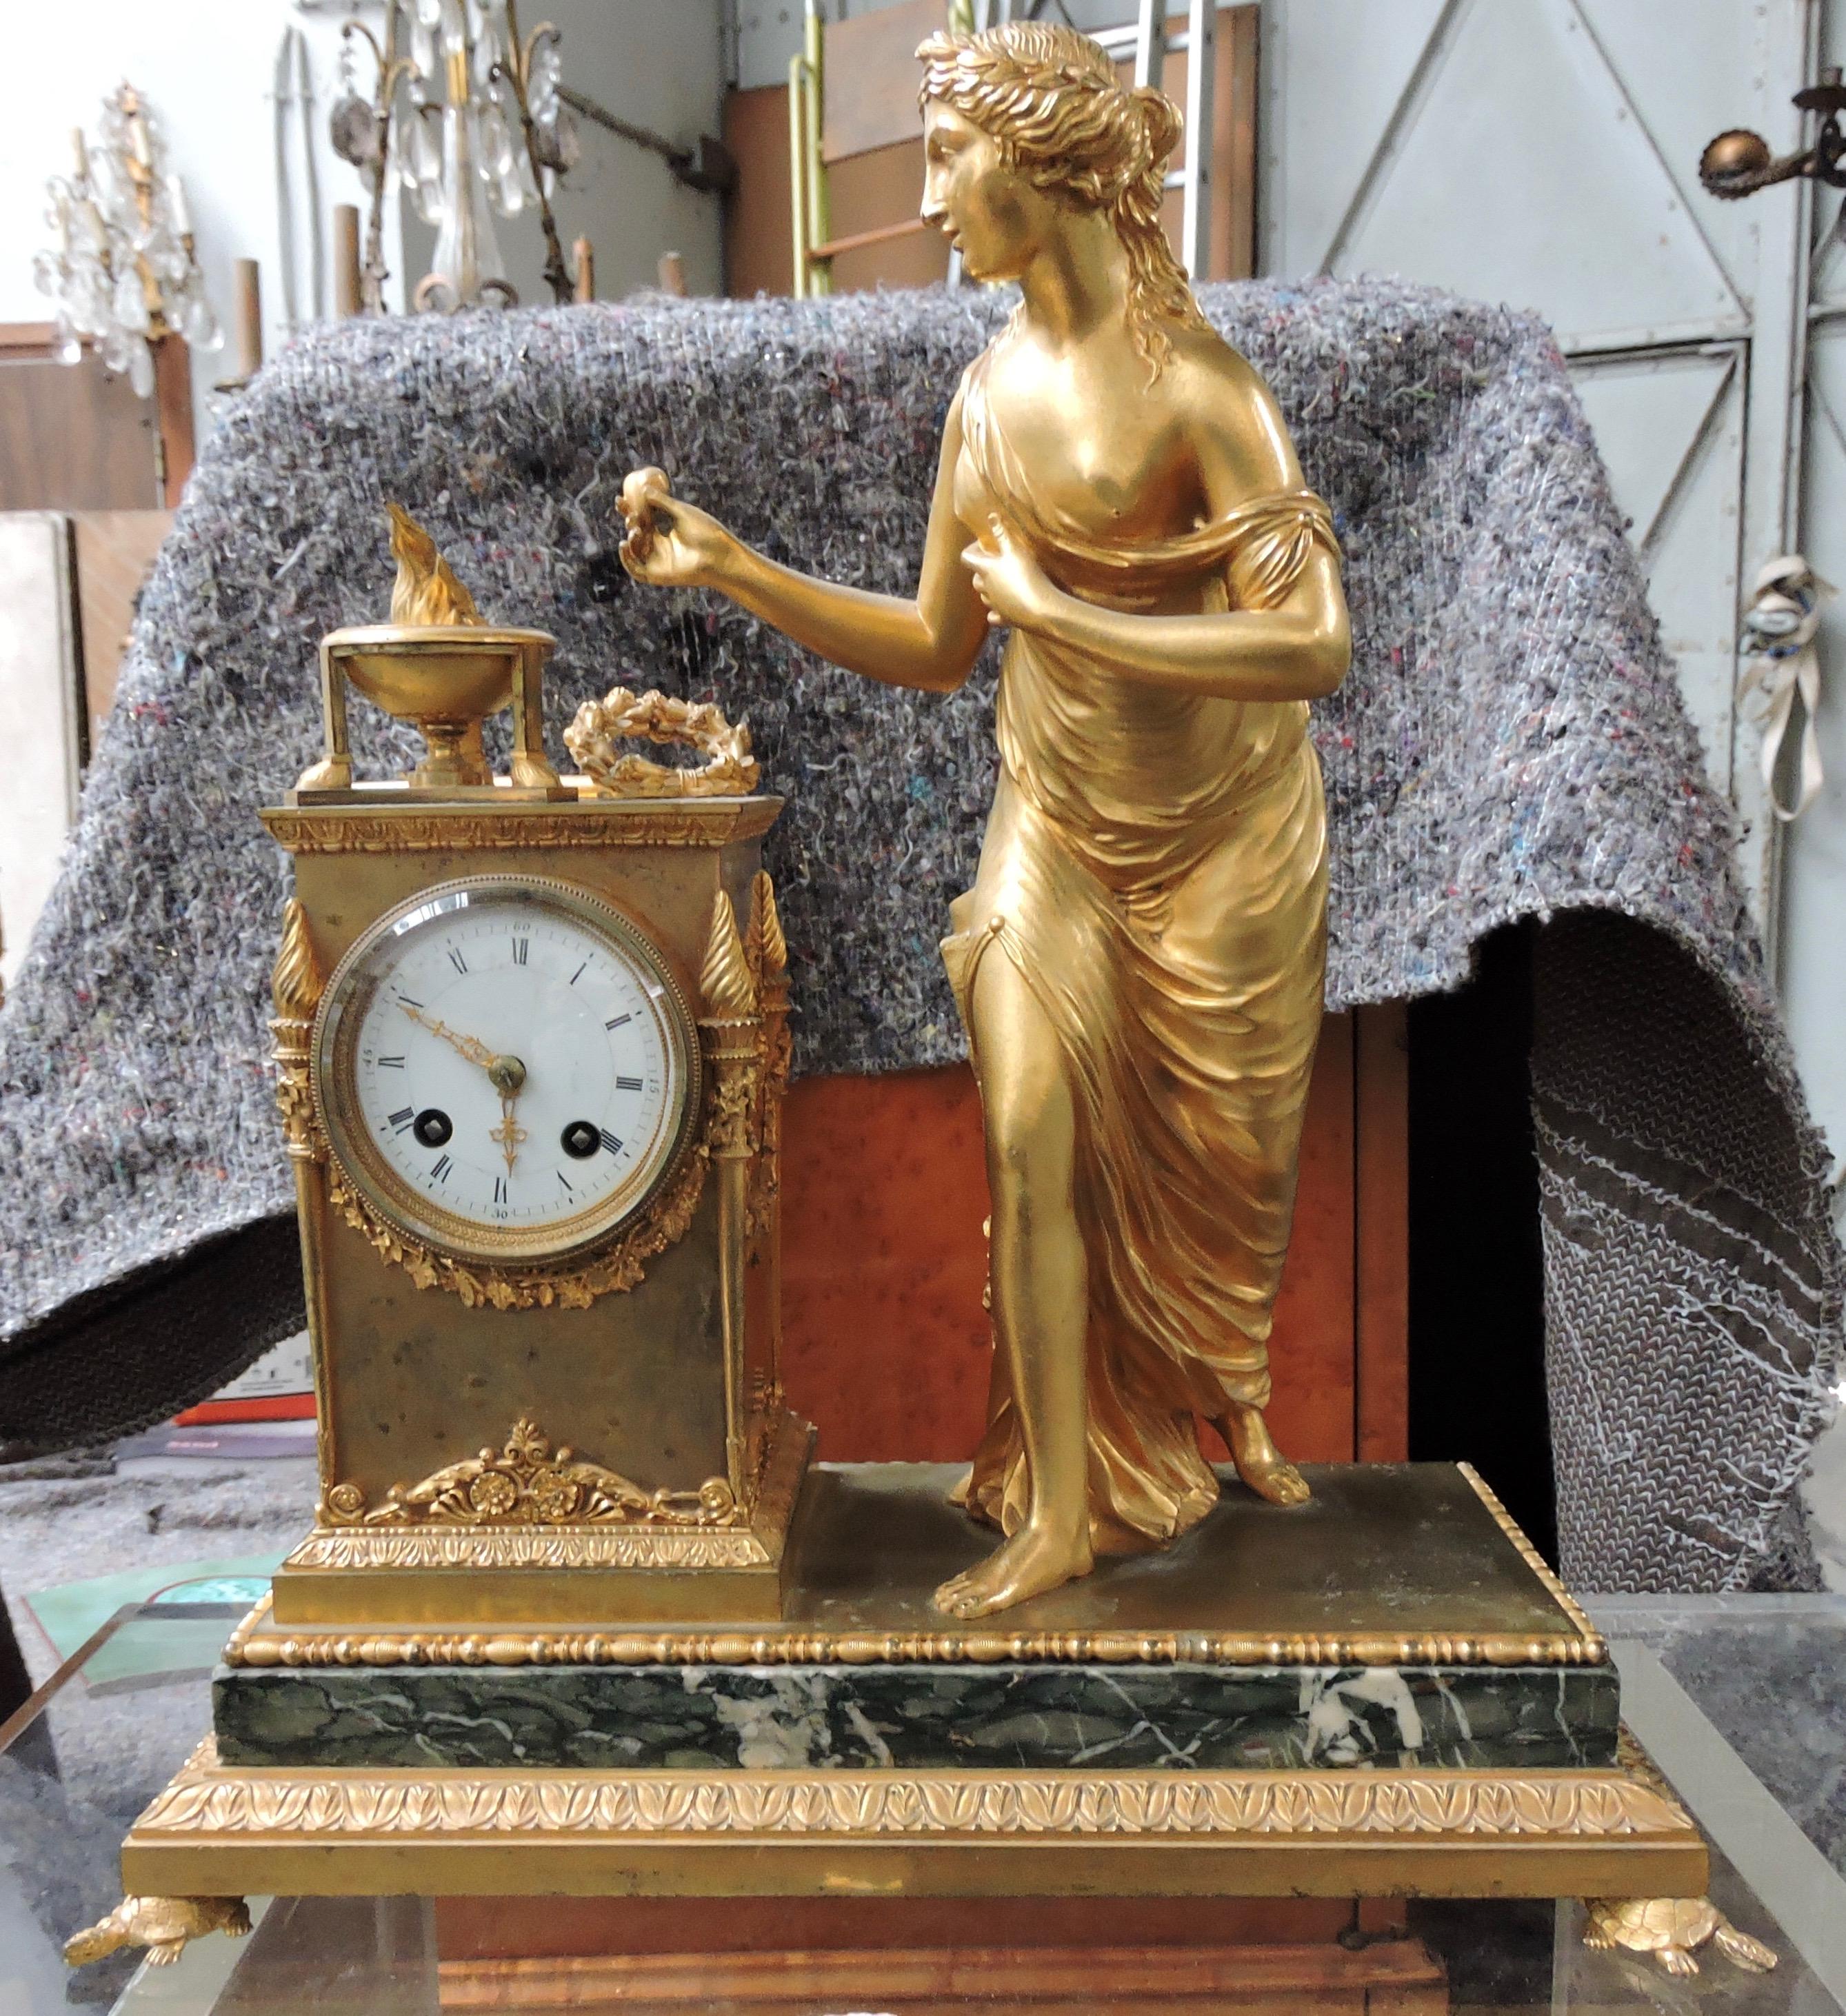 A French 19th century Restauration marble and ormolu mantel (fireplace) Clock, 
Designed with a Vestale Woman watching the Vesta Temple Fire
On a green 